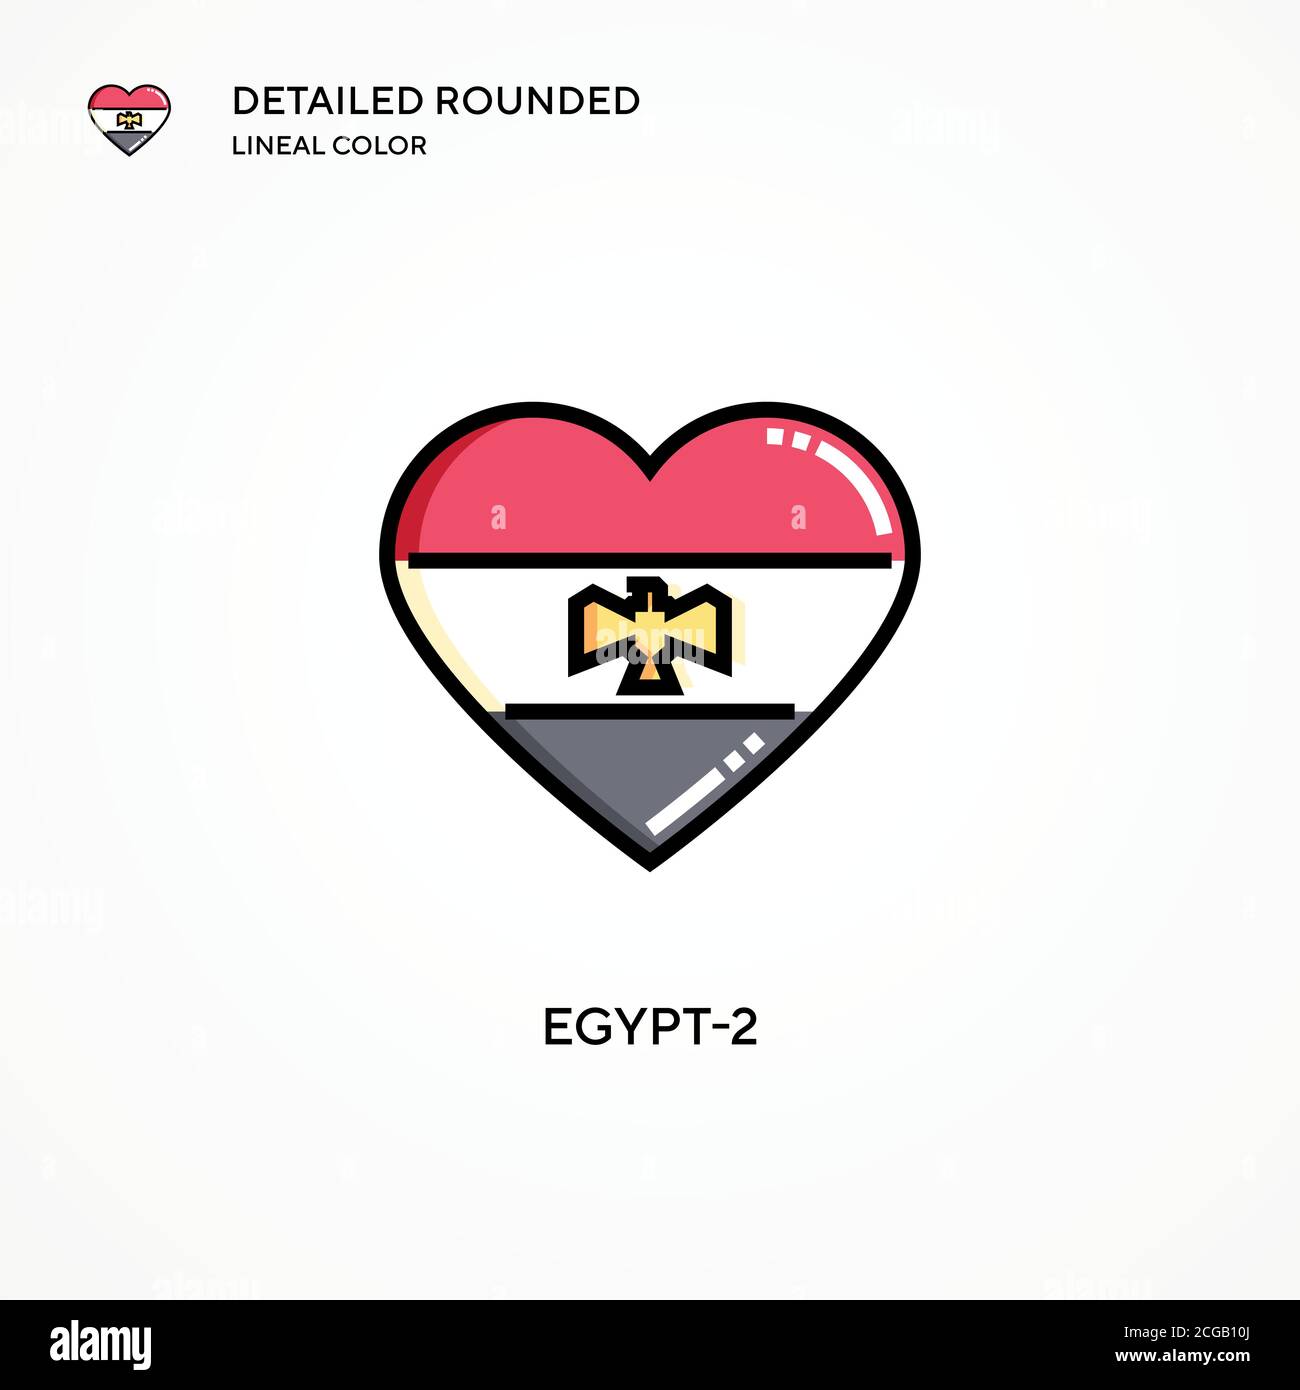 Egypt-2 vector icon. Modern vector illustration concepts. Easy to edit and customize. Stock Vector